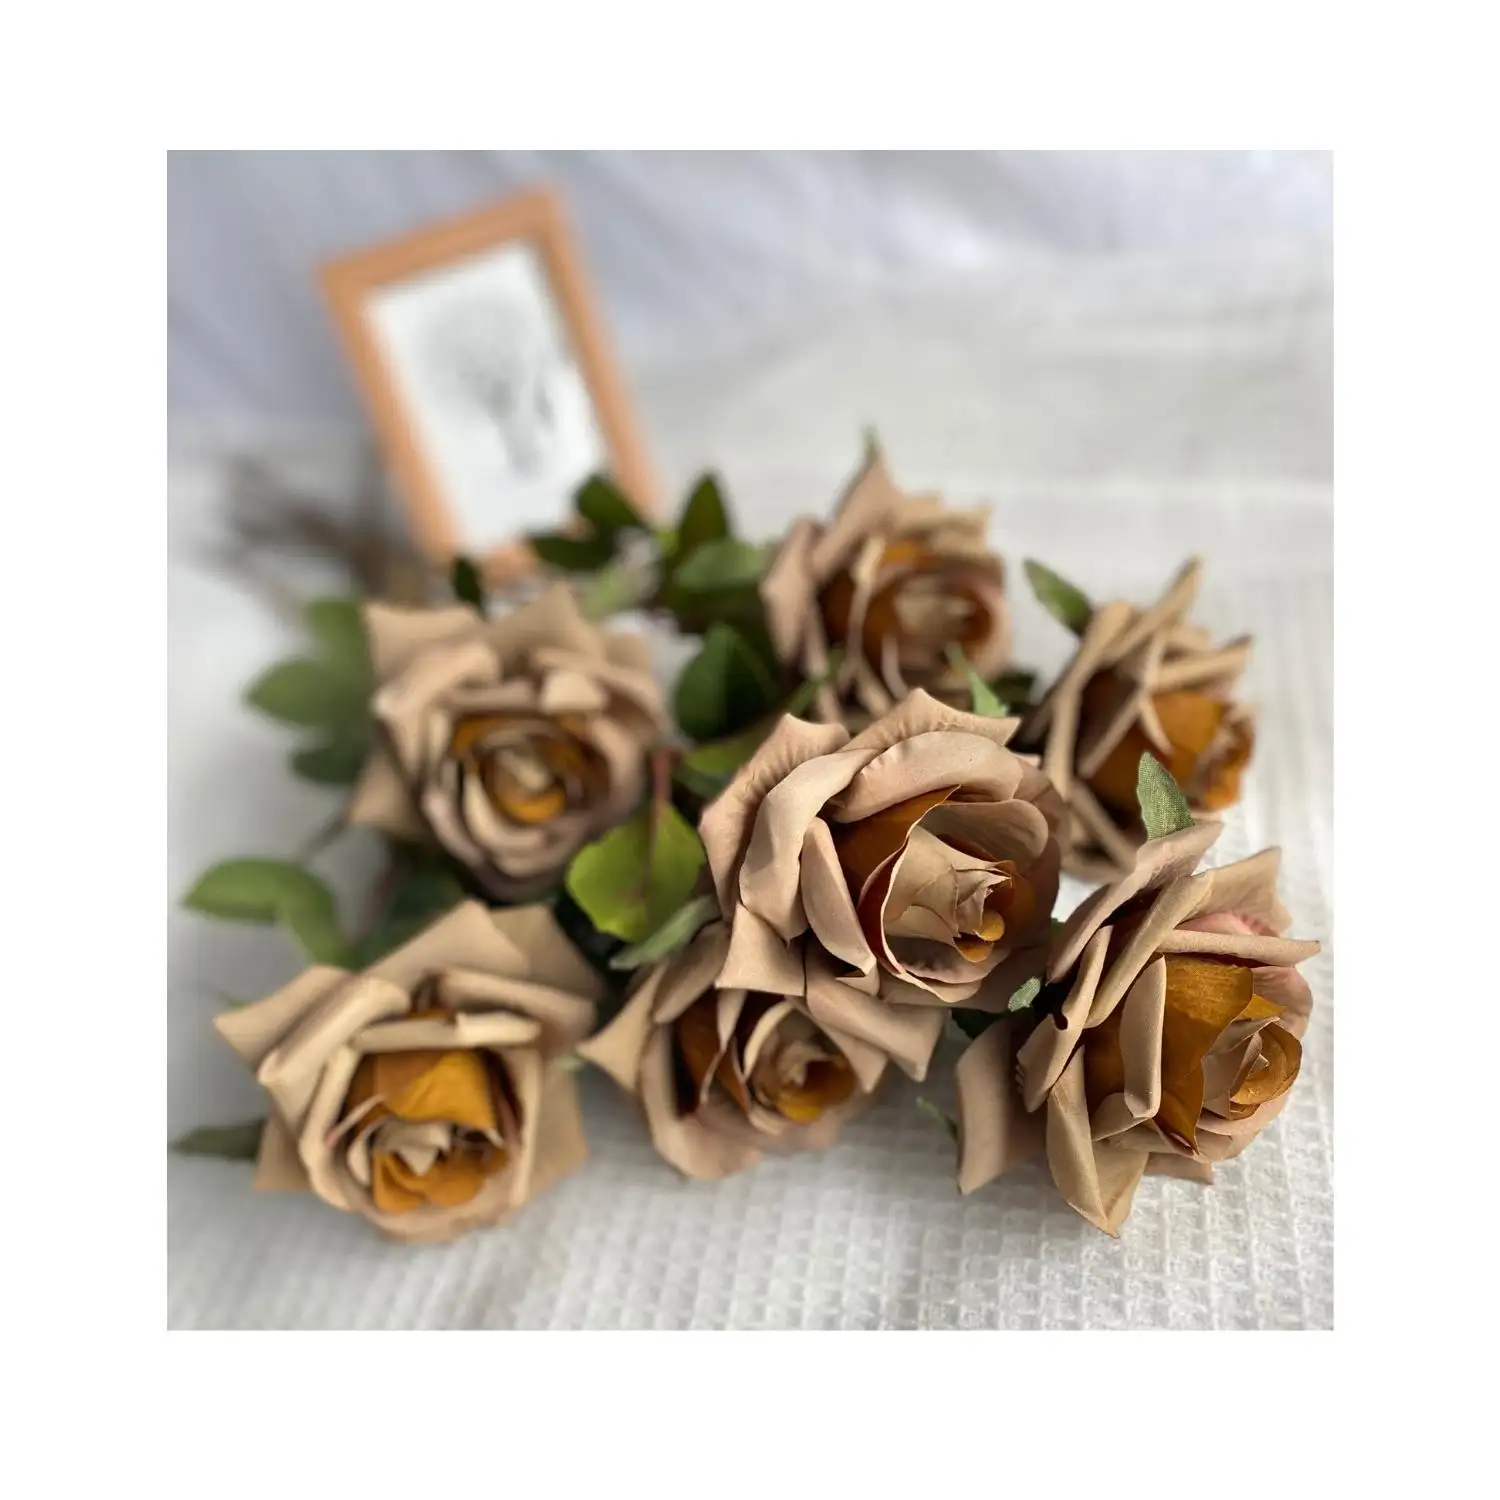 Artificial Rose Roses Flowers Decorative Wedding Decoration Fall Rustic Floral Harvest Halloween Decorations Faux Dried Flower